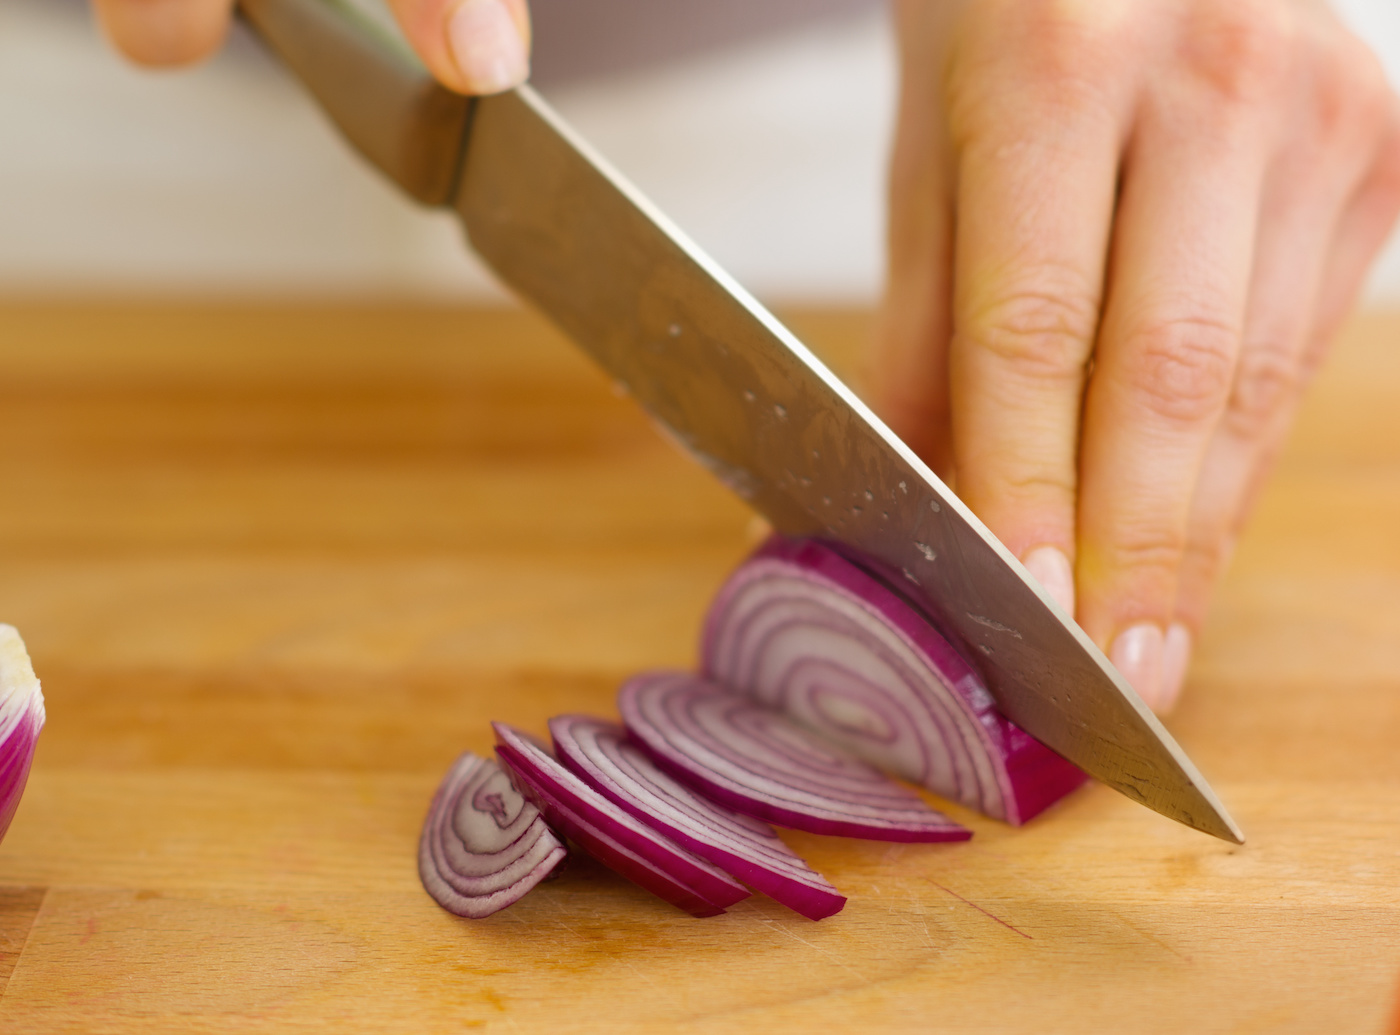 Cutting-an-onion-with-a-knife